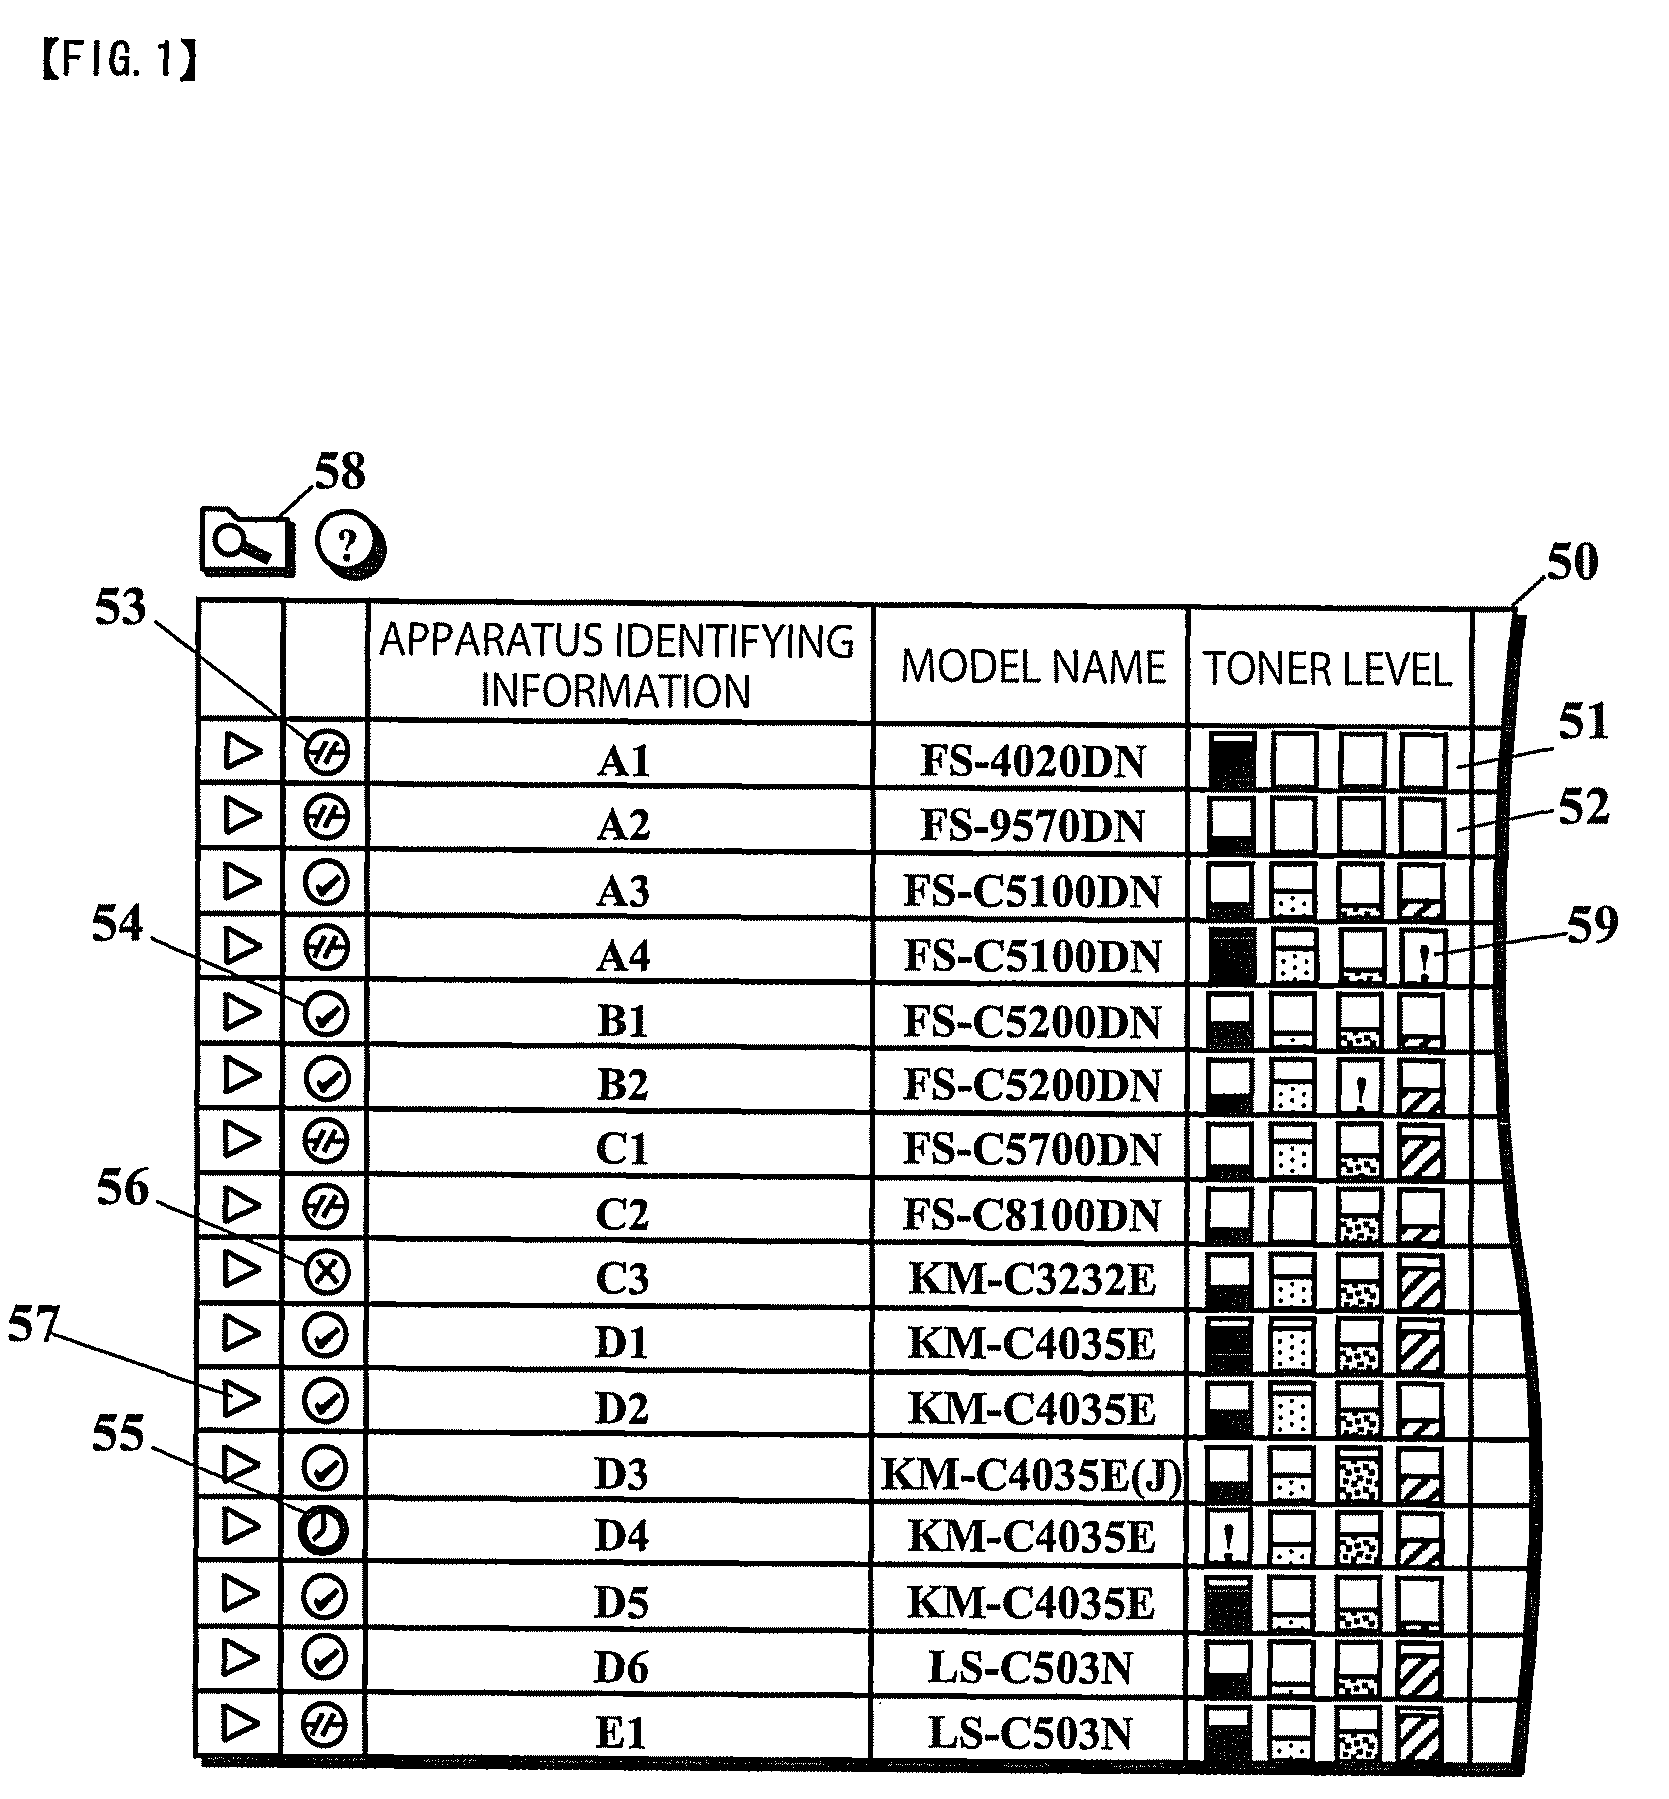 Displaying status icons of remaining consumables for plural image forming apparatuses